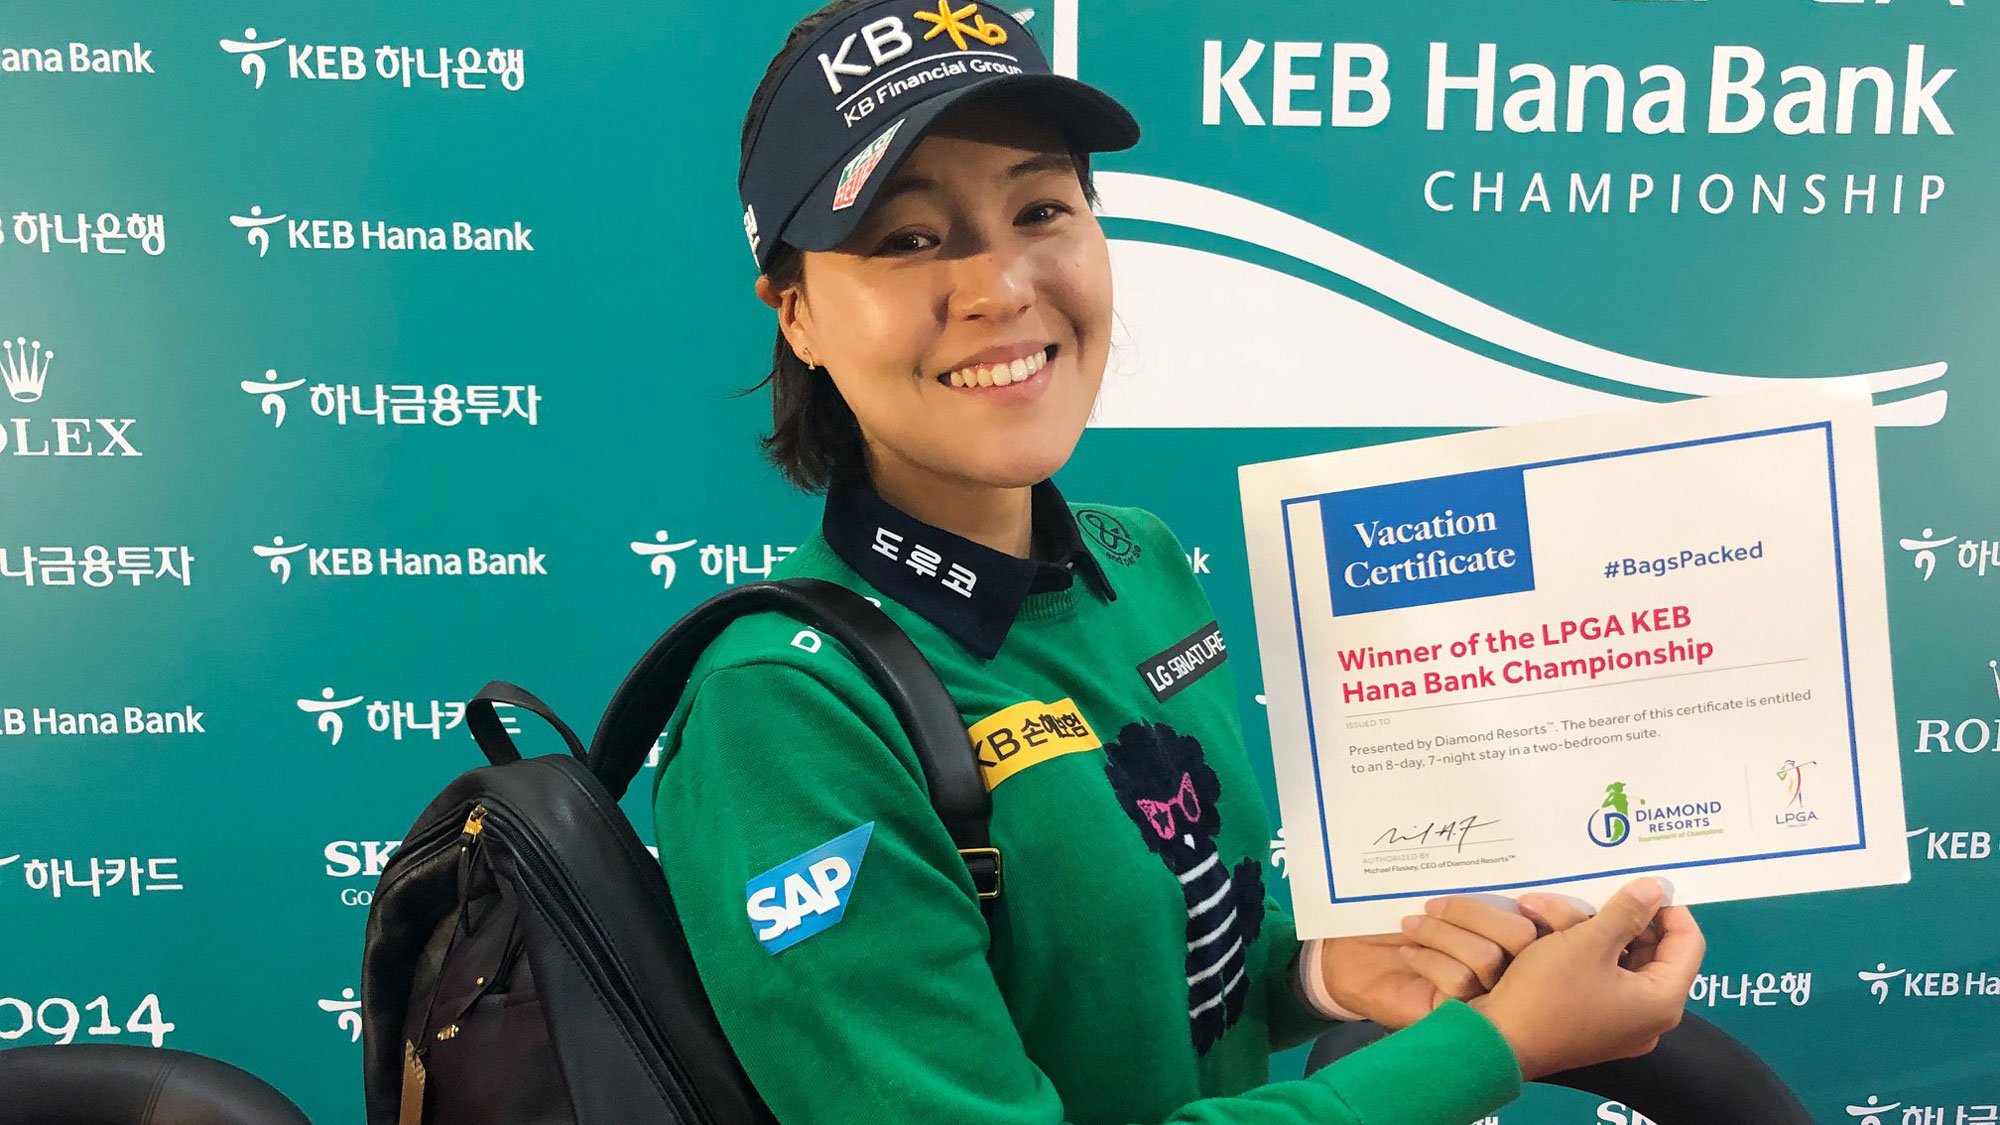 In Gee Chun has her #BagsPacked for the 2019 Diamond Resorts Tournament of Champions presented by Insurance Office of America after her victory at the 2018 LPGA KEB Hana Bank Championship